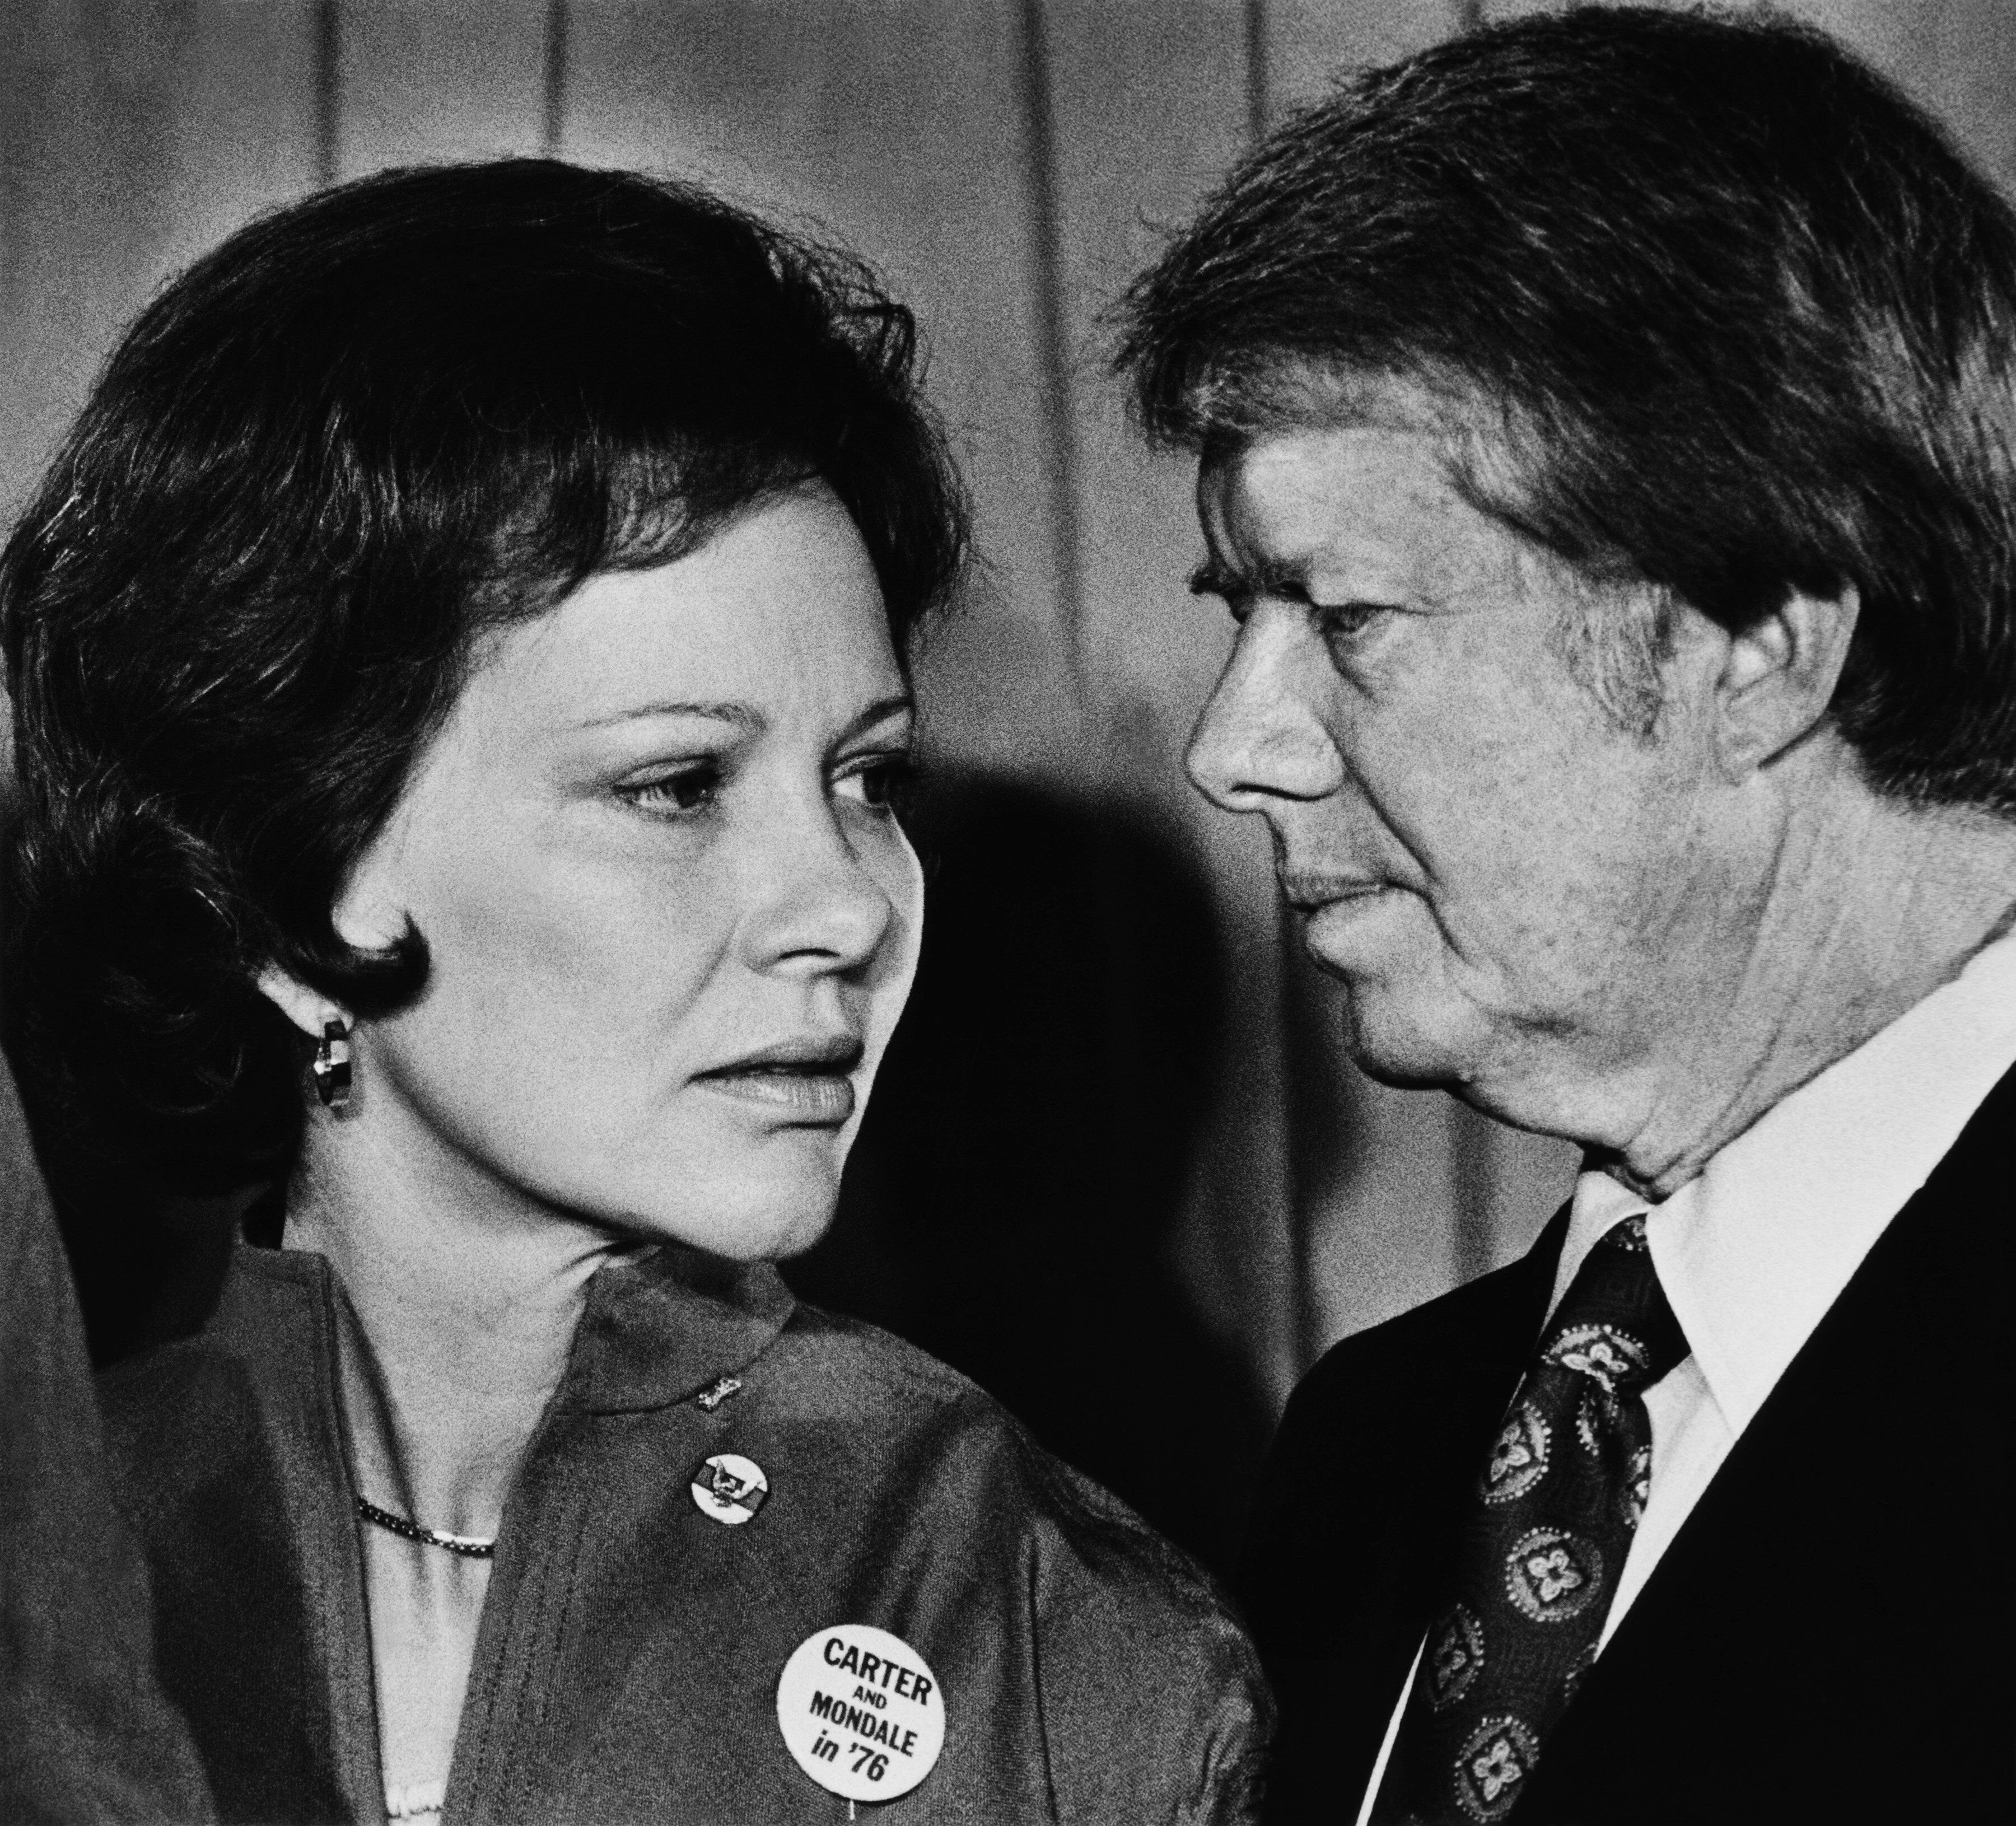 Jimmy and Rosalynn Carter at the 1976 Democratic National Convention. | Source: Getty Images